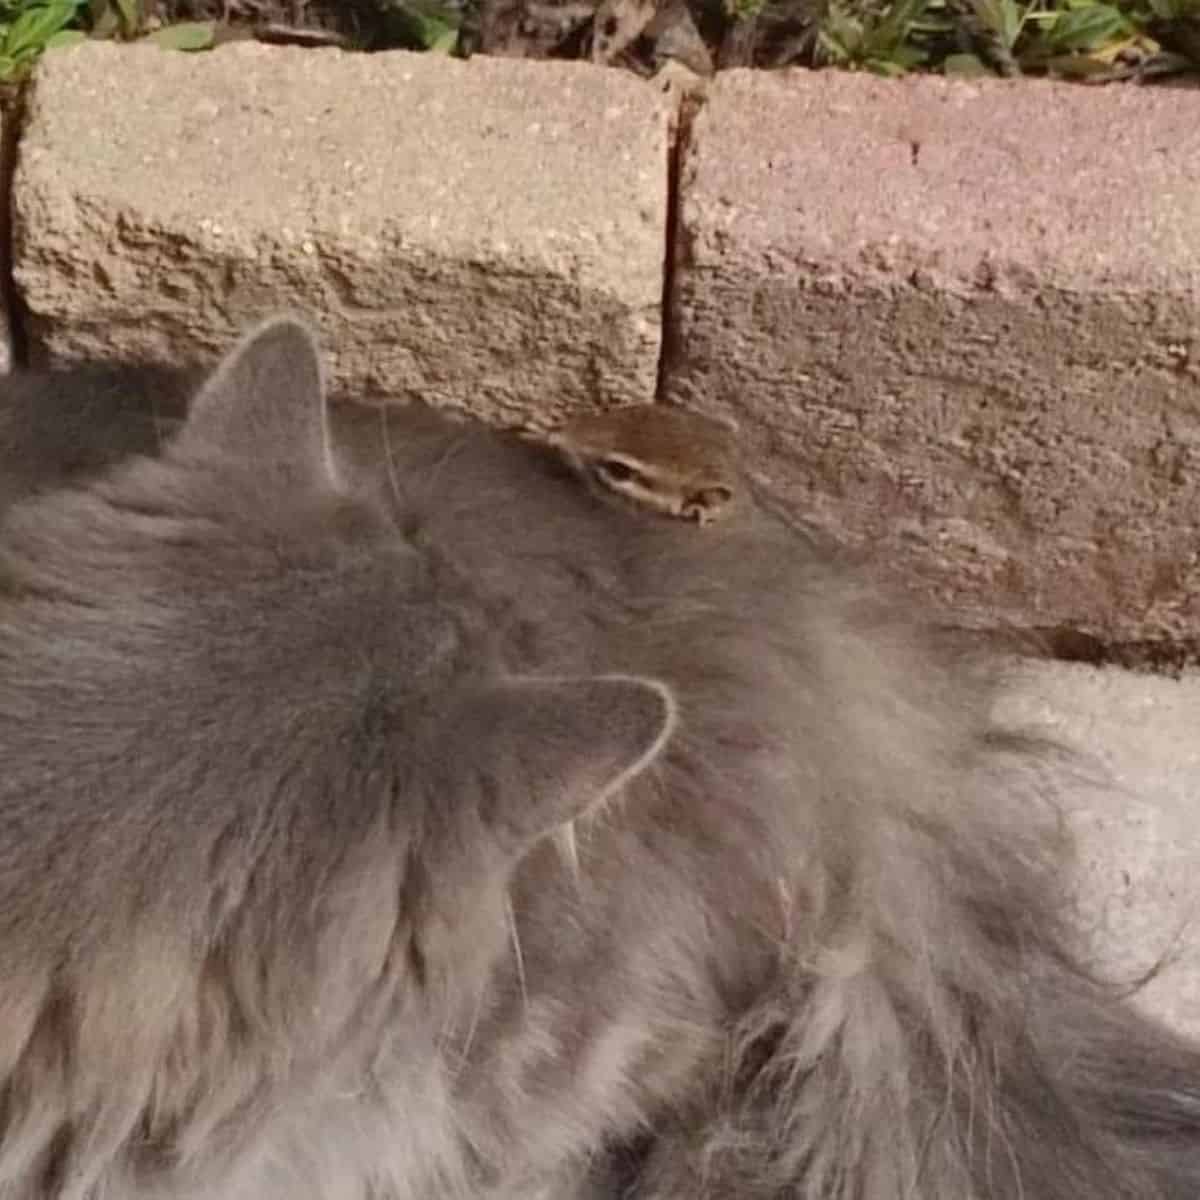 the squirrel hides behind the cat